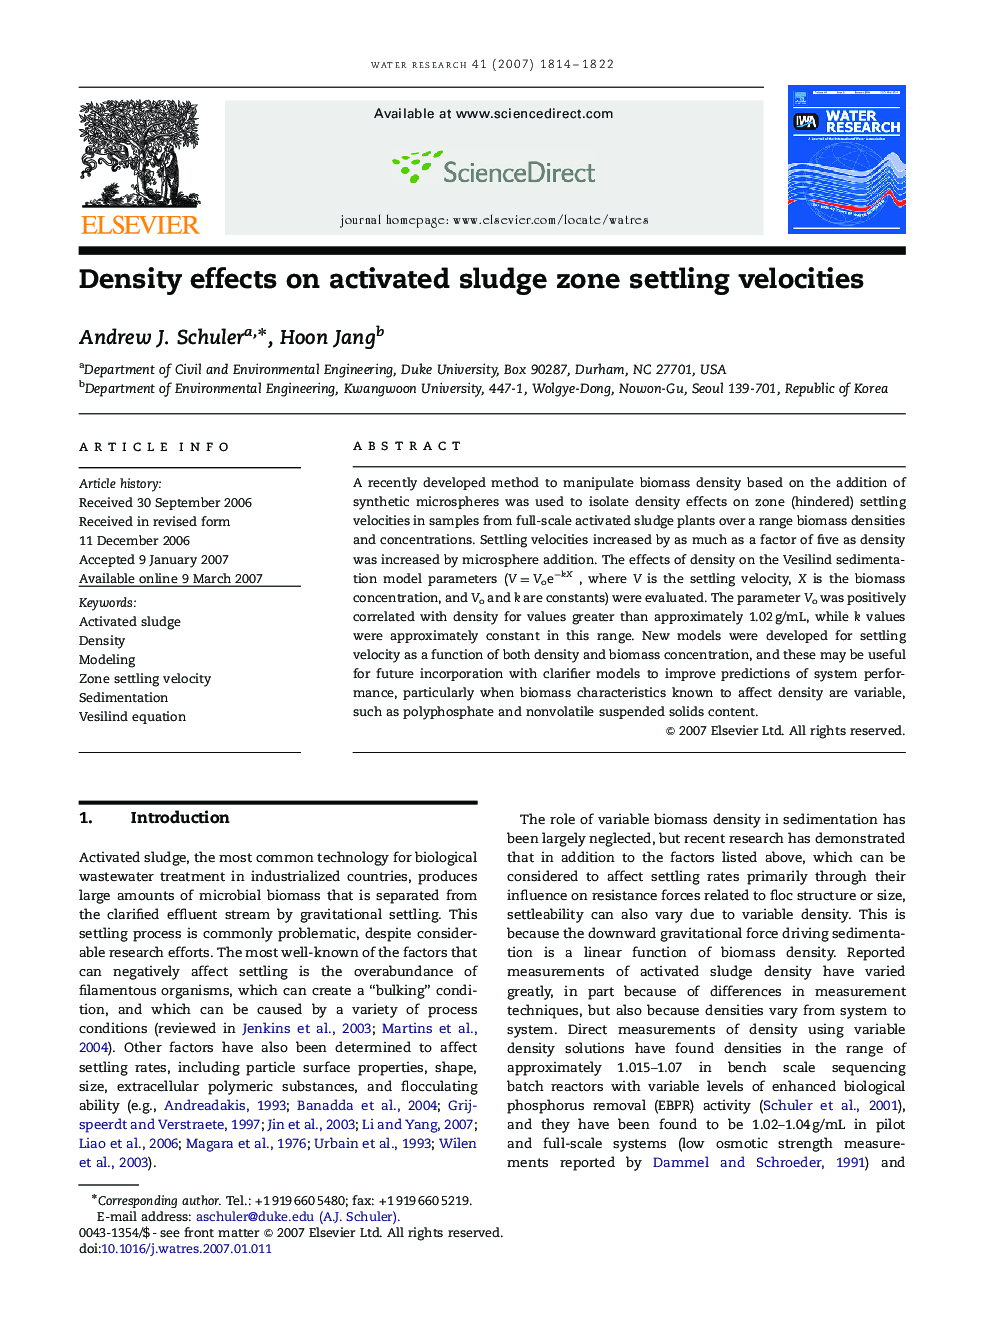 Density effects on activated sludge zone settling velocities